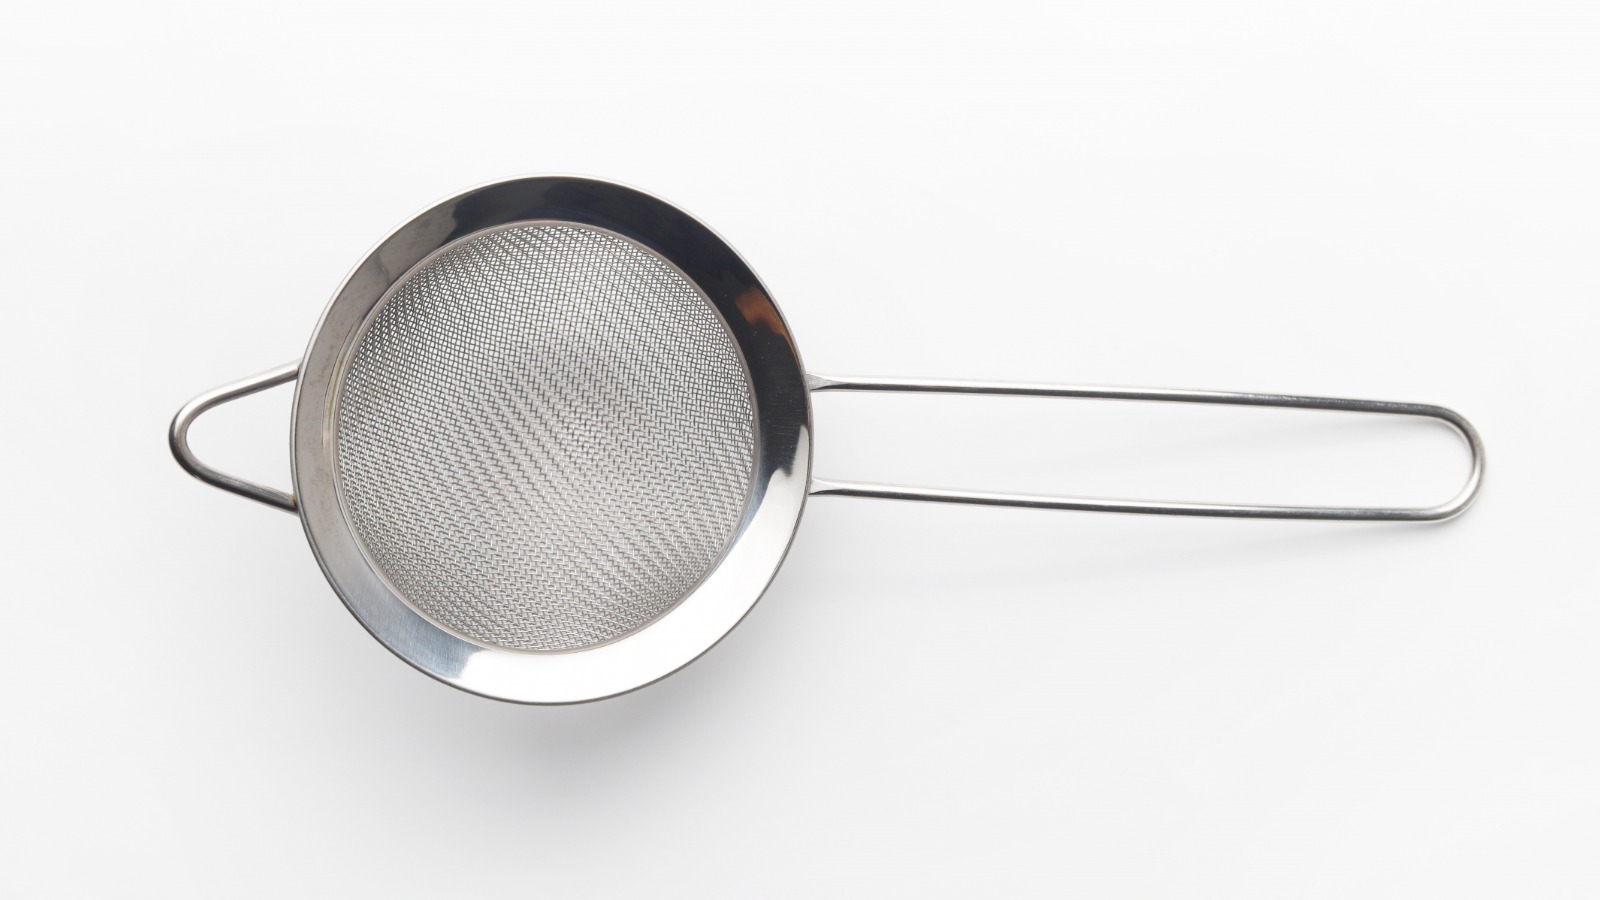 https://www.tastingtable.com/img/gallery/the-18-best-uses-for-fine-mesh-strainers/l-intro-1675292968.jpg